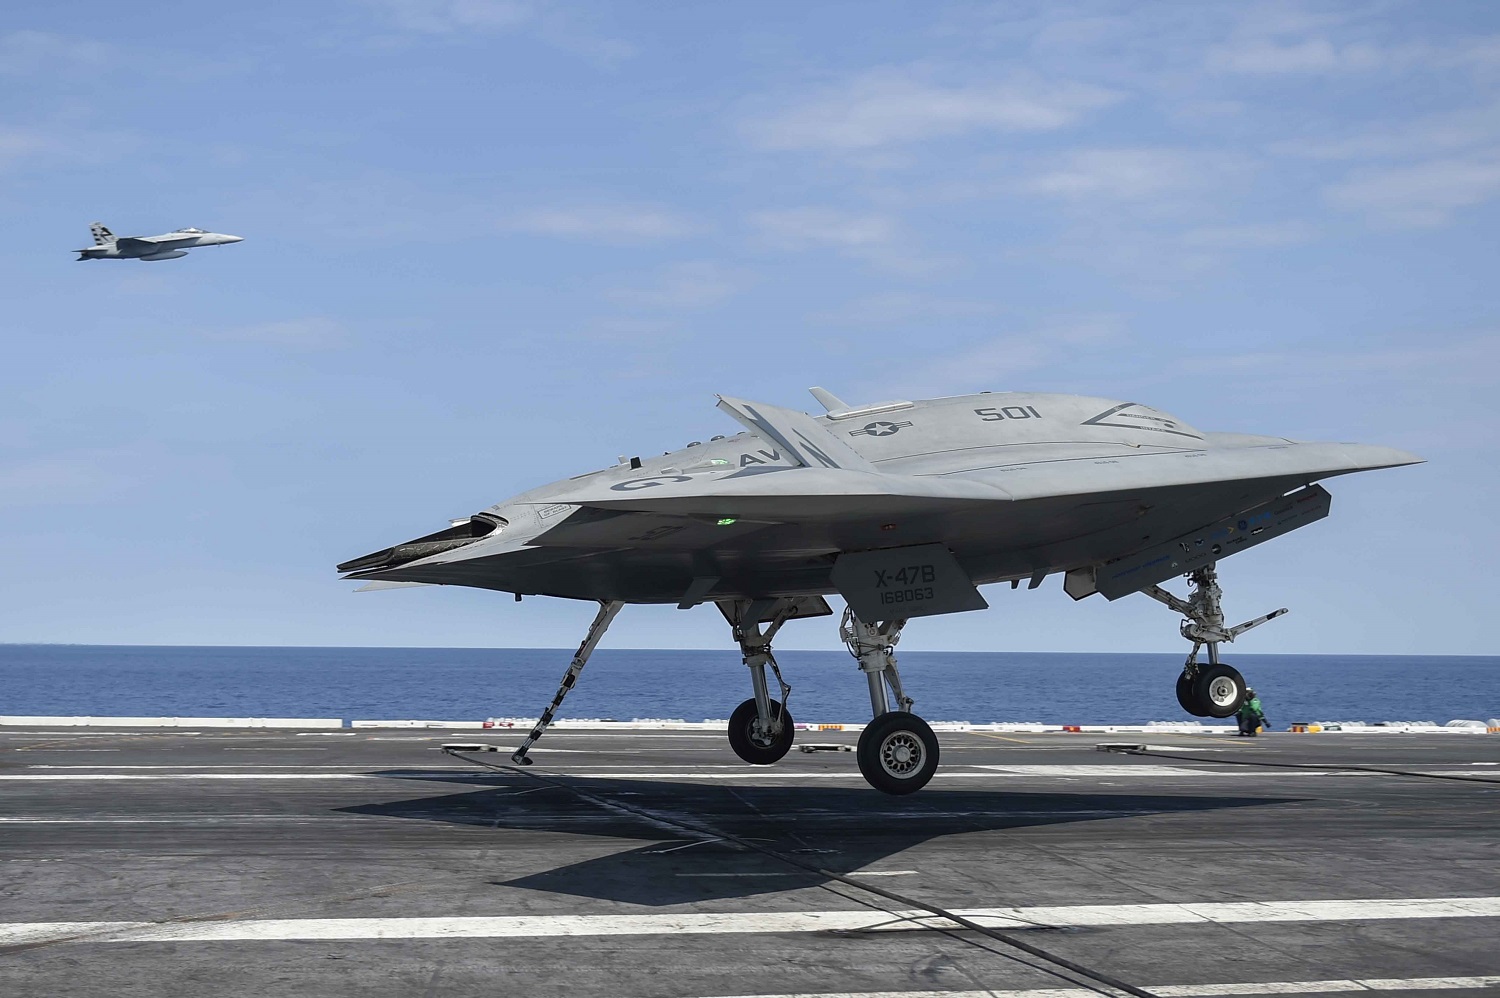 ATLANTIC OCEAN (Aug. 17, 2014) The Navy's unmanned X-47B lands aboard the aircraft carrier USS Theodore Roosevelt (CVN 71). The aircraft completed a series of tests demonstrating its ability to operate safely and seamlessly with manned aircraft. U.S. Navy photo 